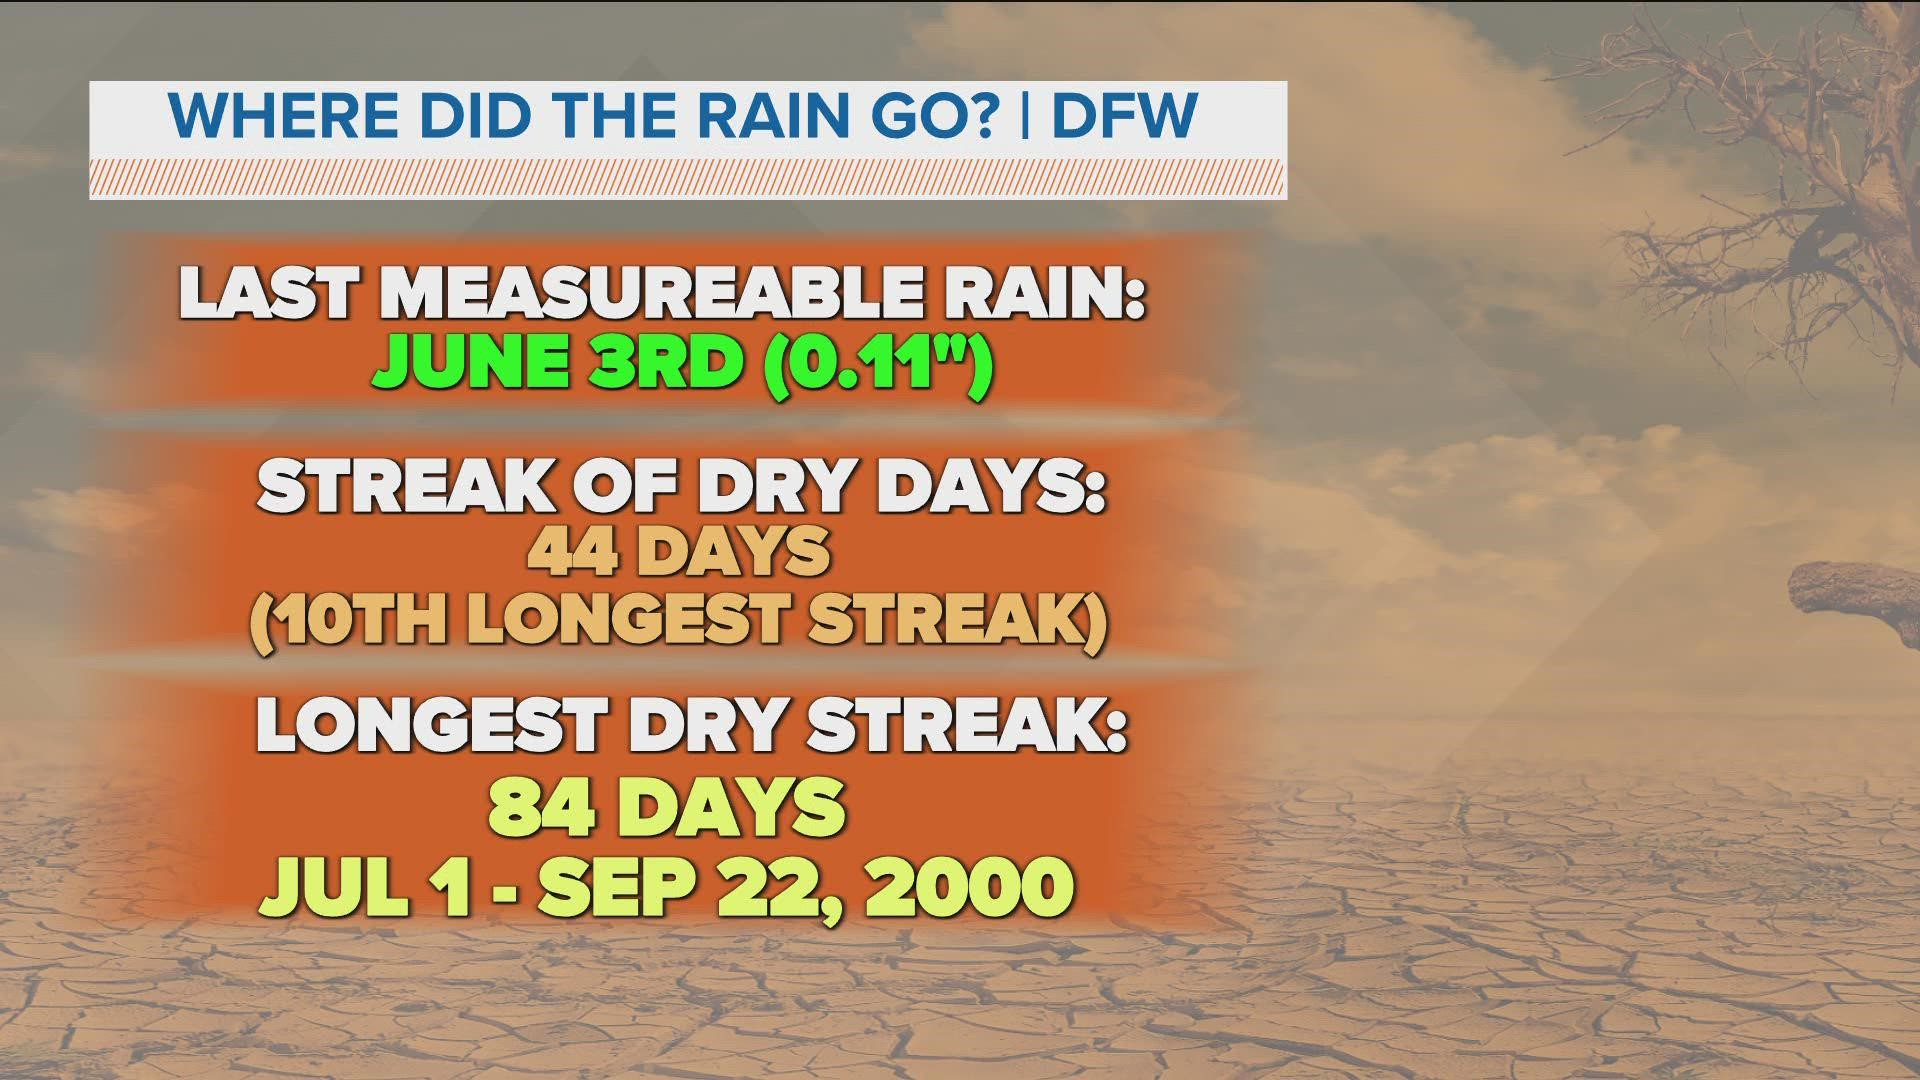 We had passing showers last week but they didn't produce any measurable rain at DFW Airport.